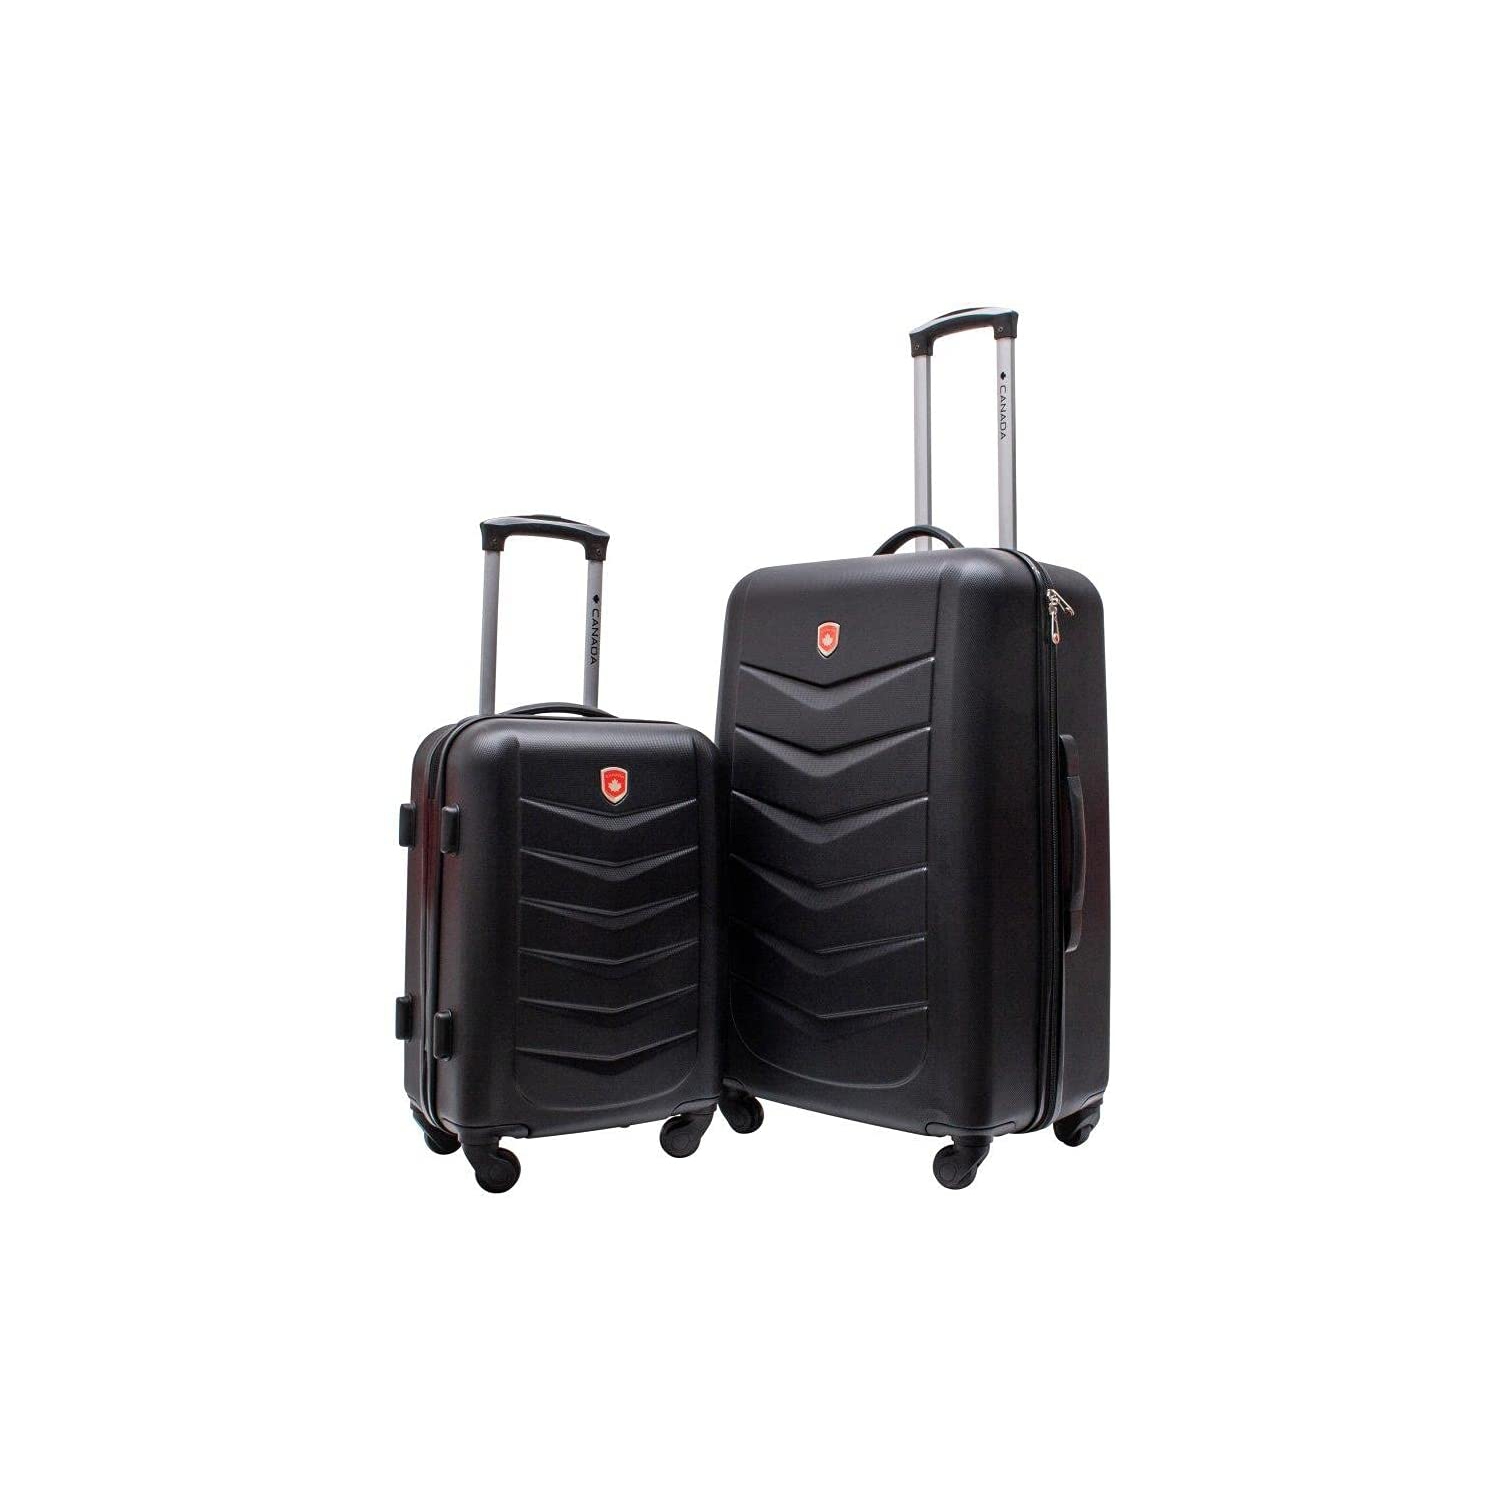 Jetstream (Canada Collection) 26 Inch and 18 Inch Hardside Carry On 2 Piece Luggage Set with Spinner Wheels Lightweight ABS Suitcase (Black)